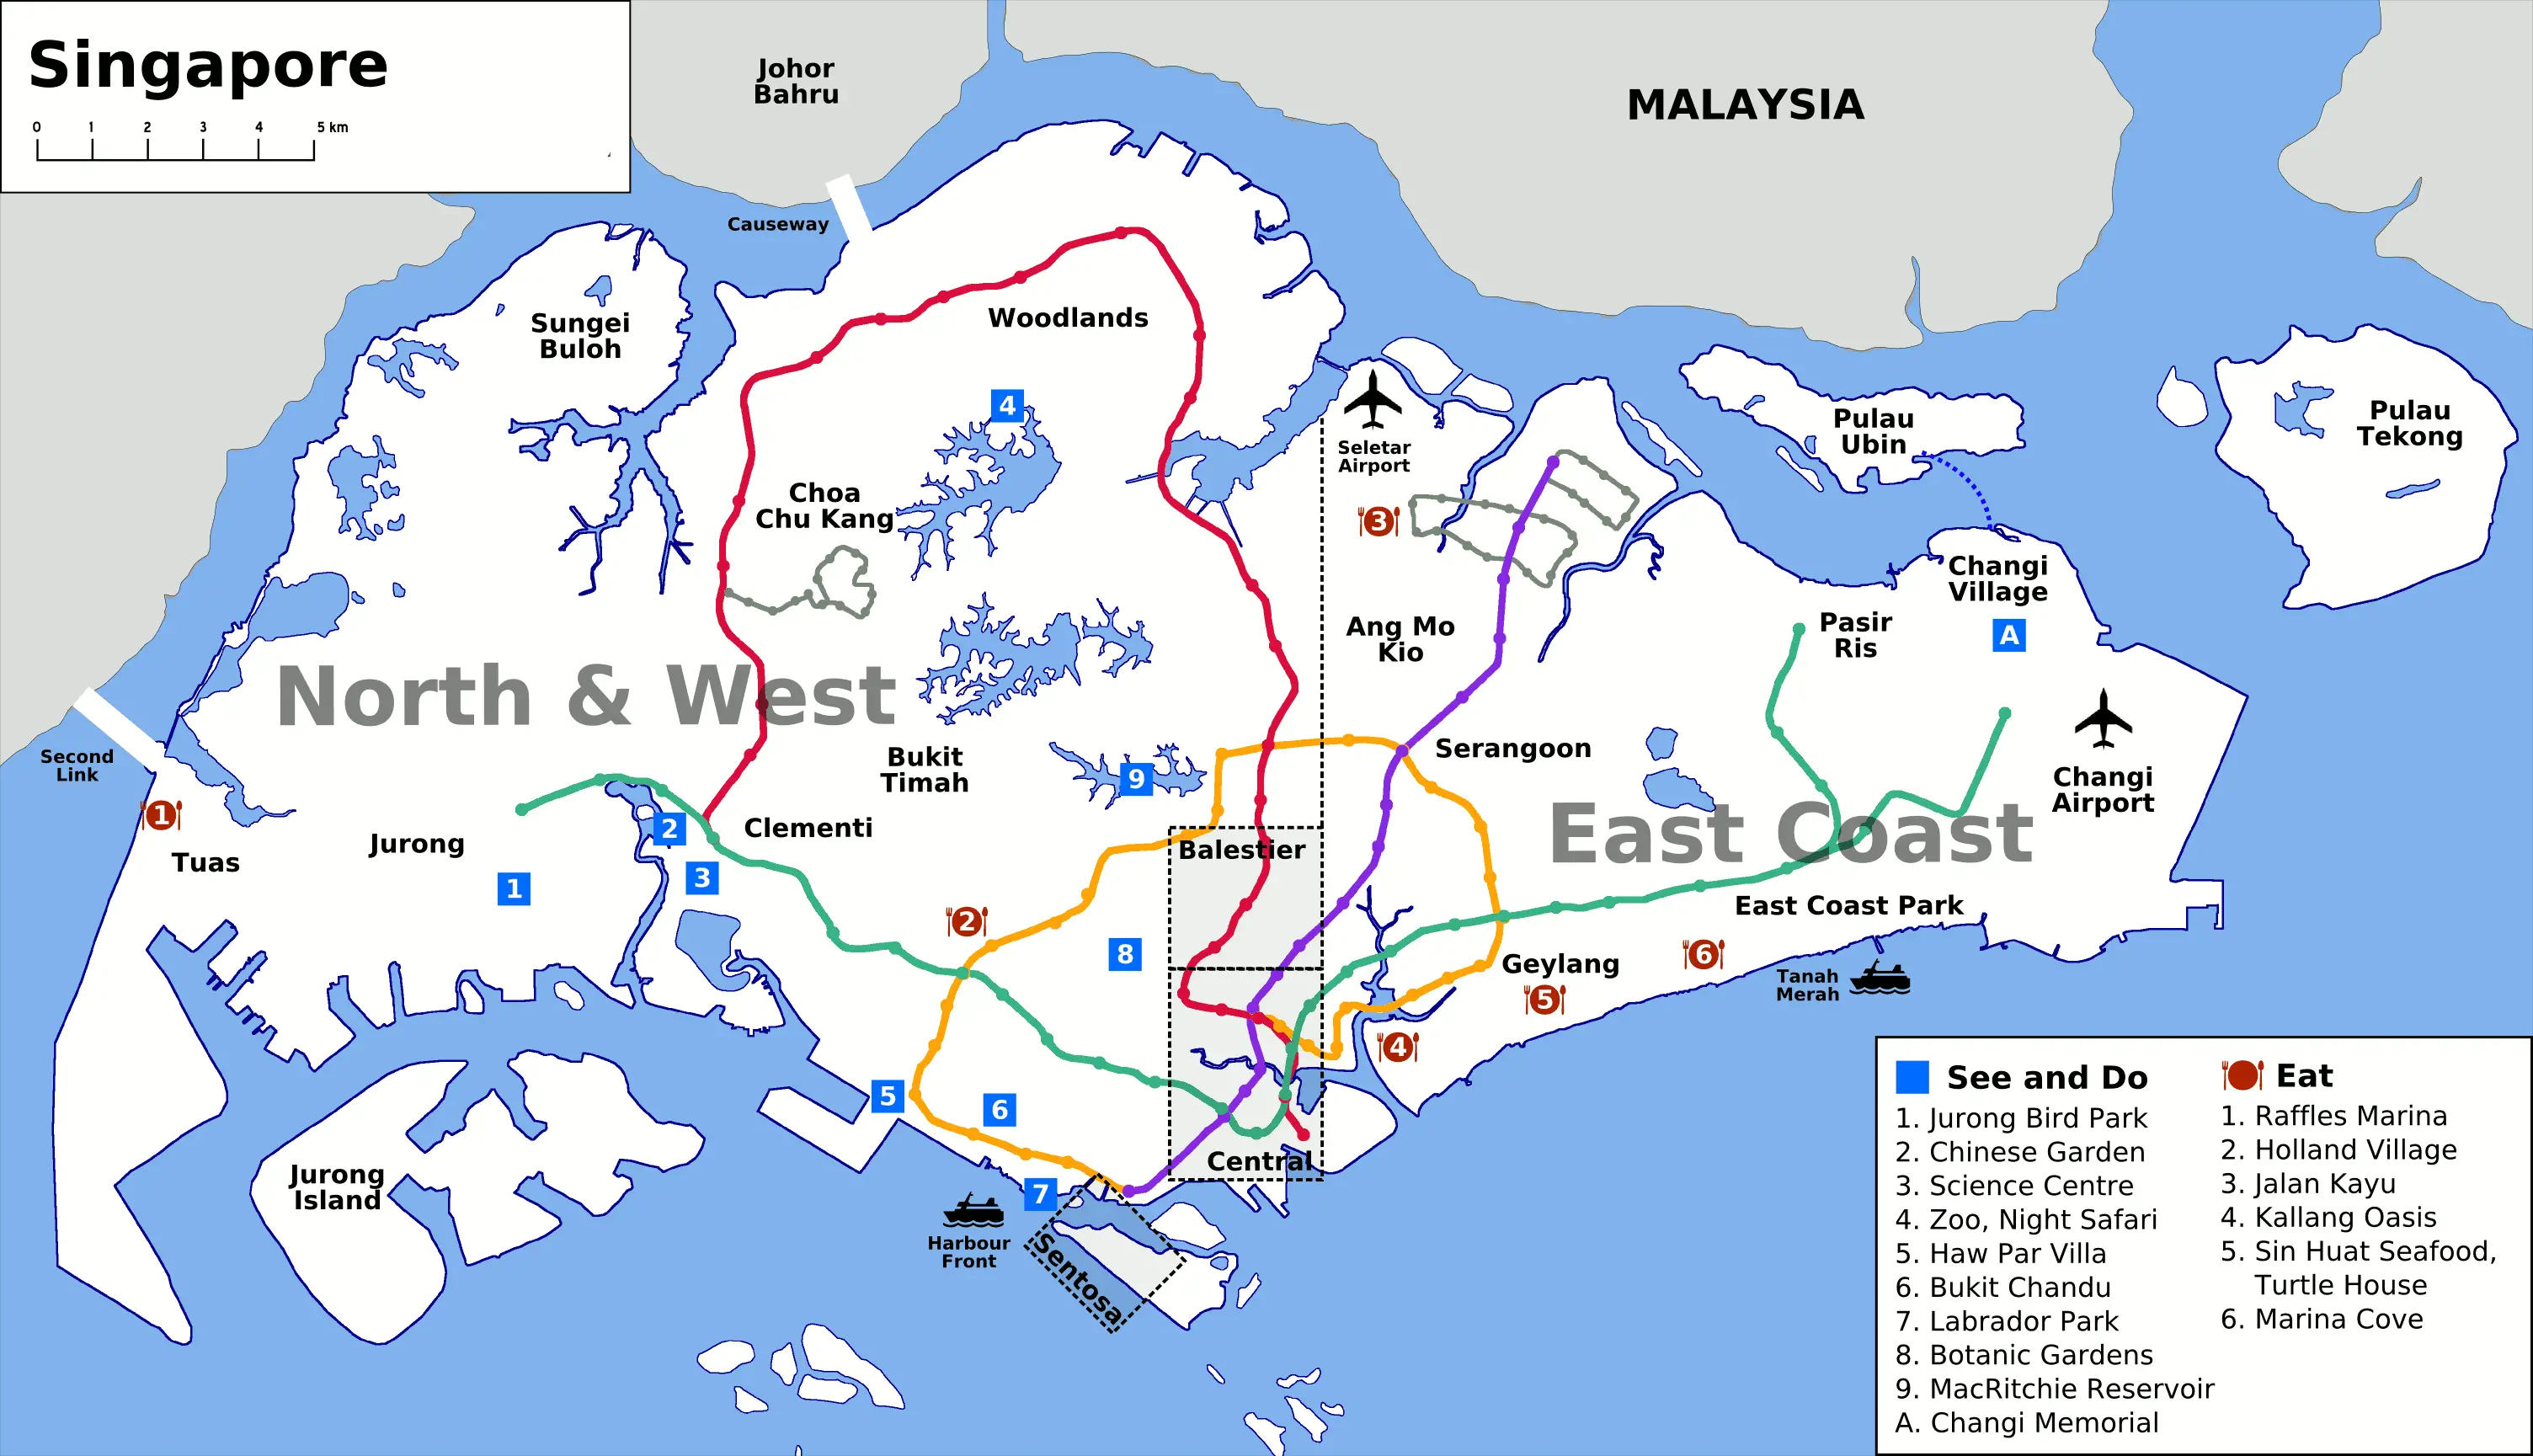 Singapore_overview_harita.png